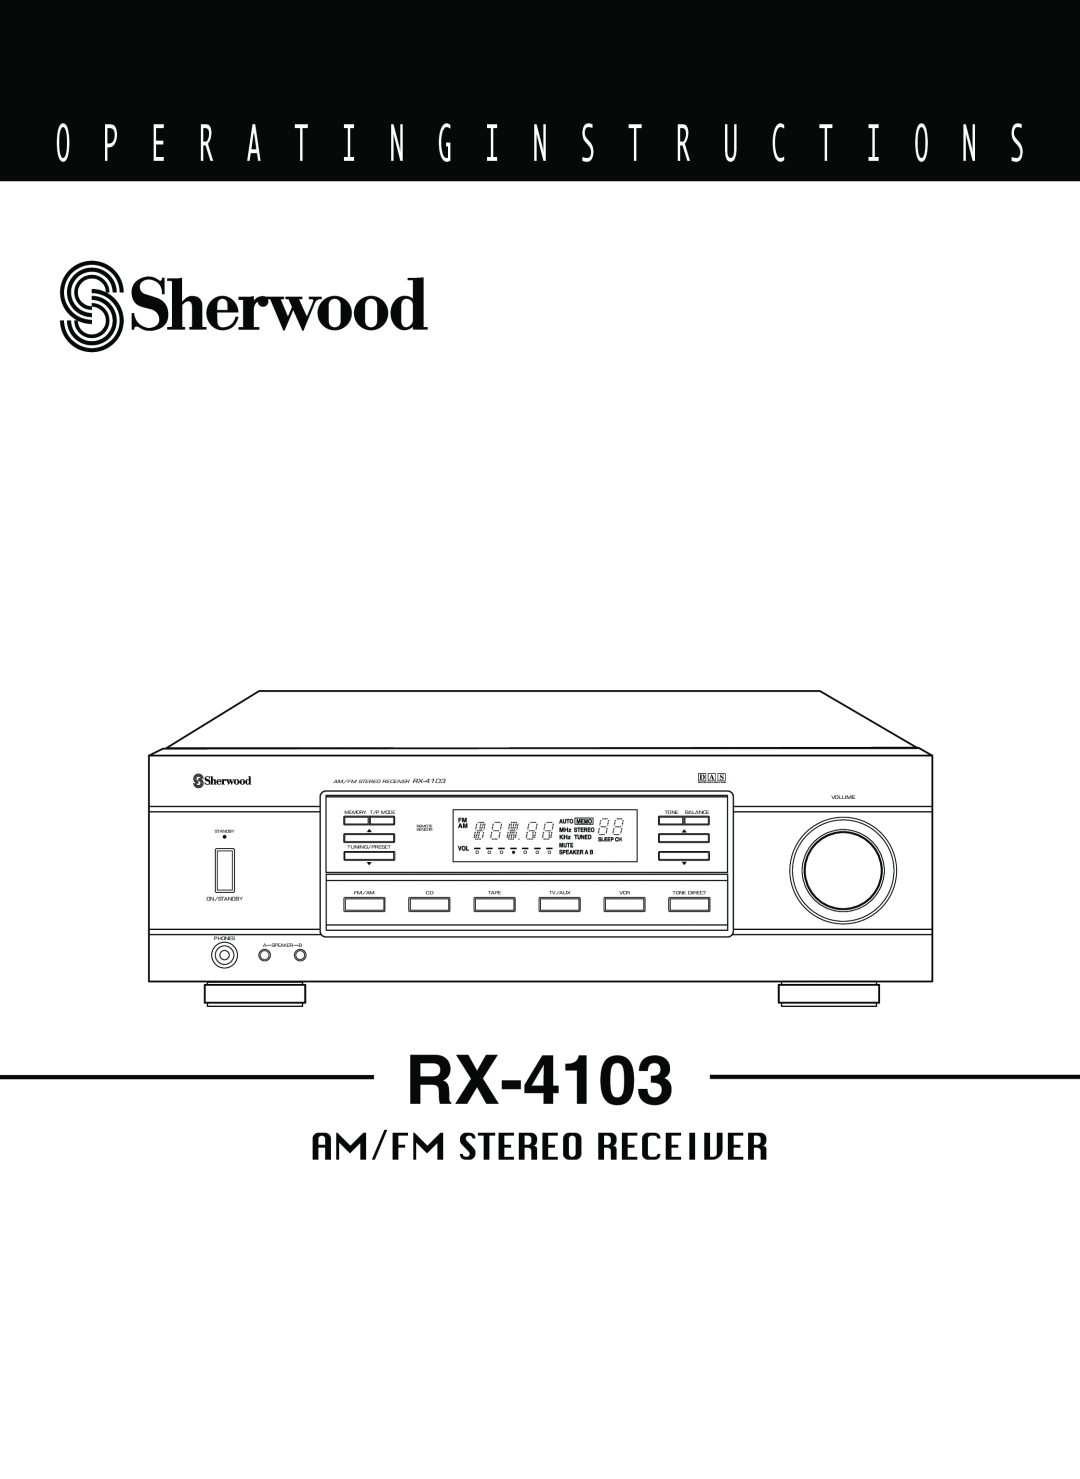 Sherwood RX-4103 manual O P E R A T I N G I N S T R U C T I O N S, Am/Fm Stereo Receiver, D A S 